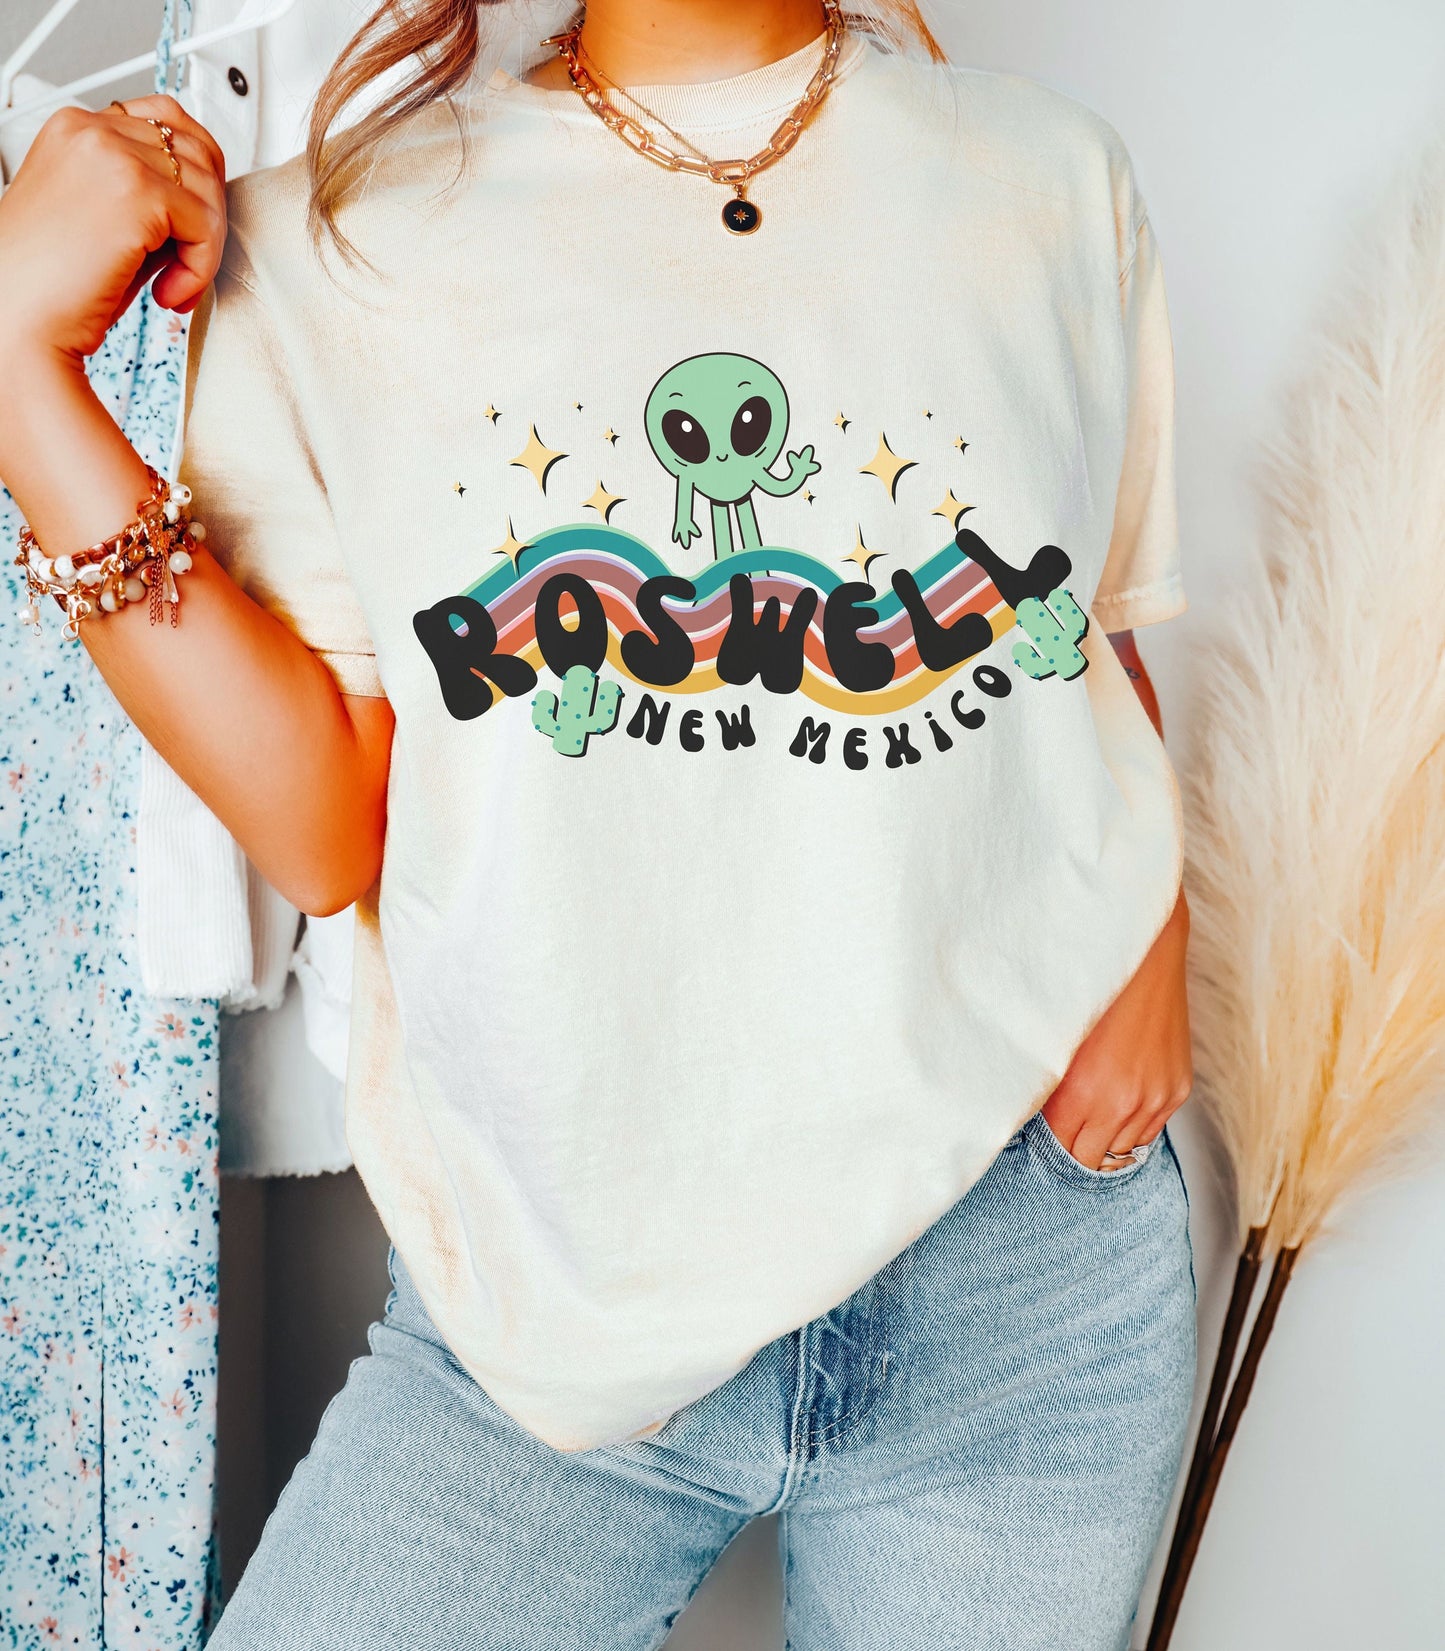 Roswell New Mexico Comfort Colors Retro Alien Shirt Cryptozoology Shirt Alien T Shirt UFO Shirt Aesthetic Southwestern Travel Graphic Tee